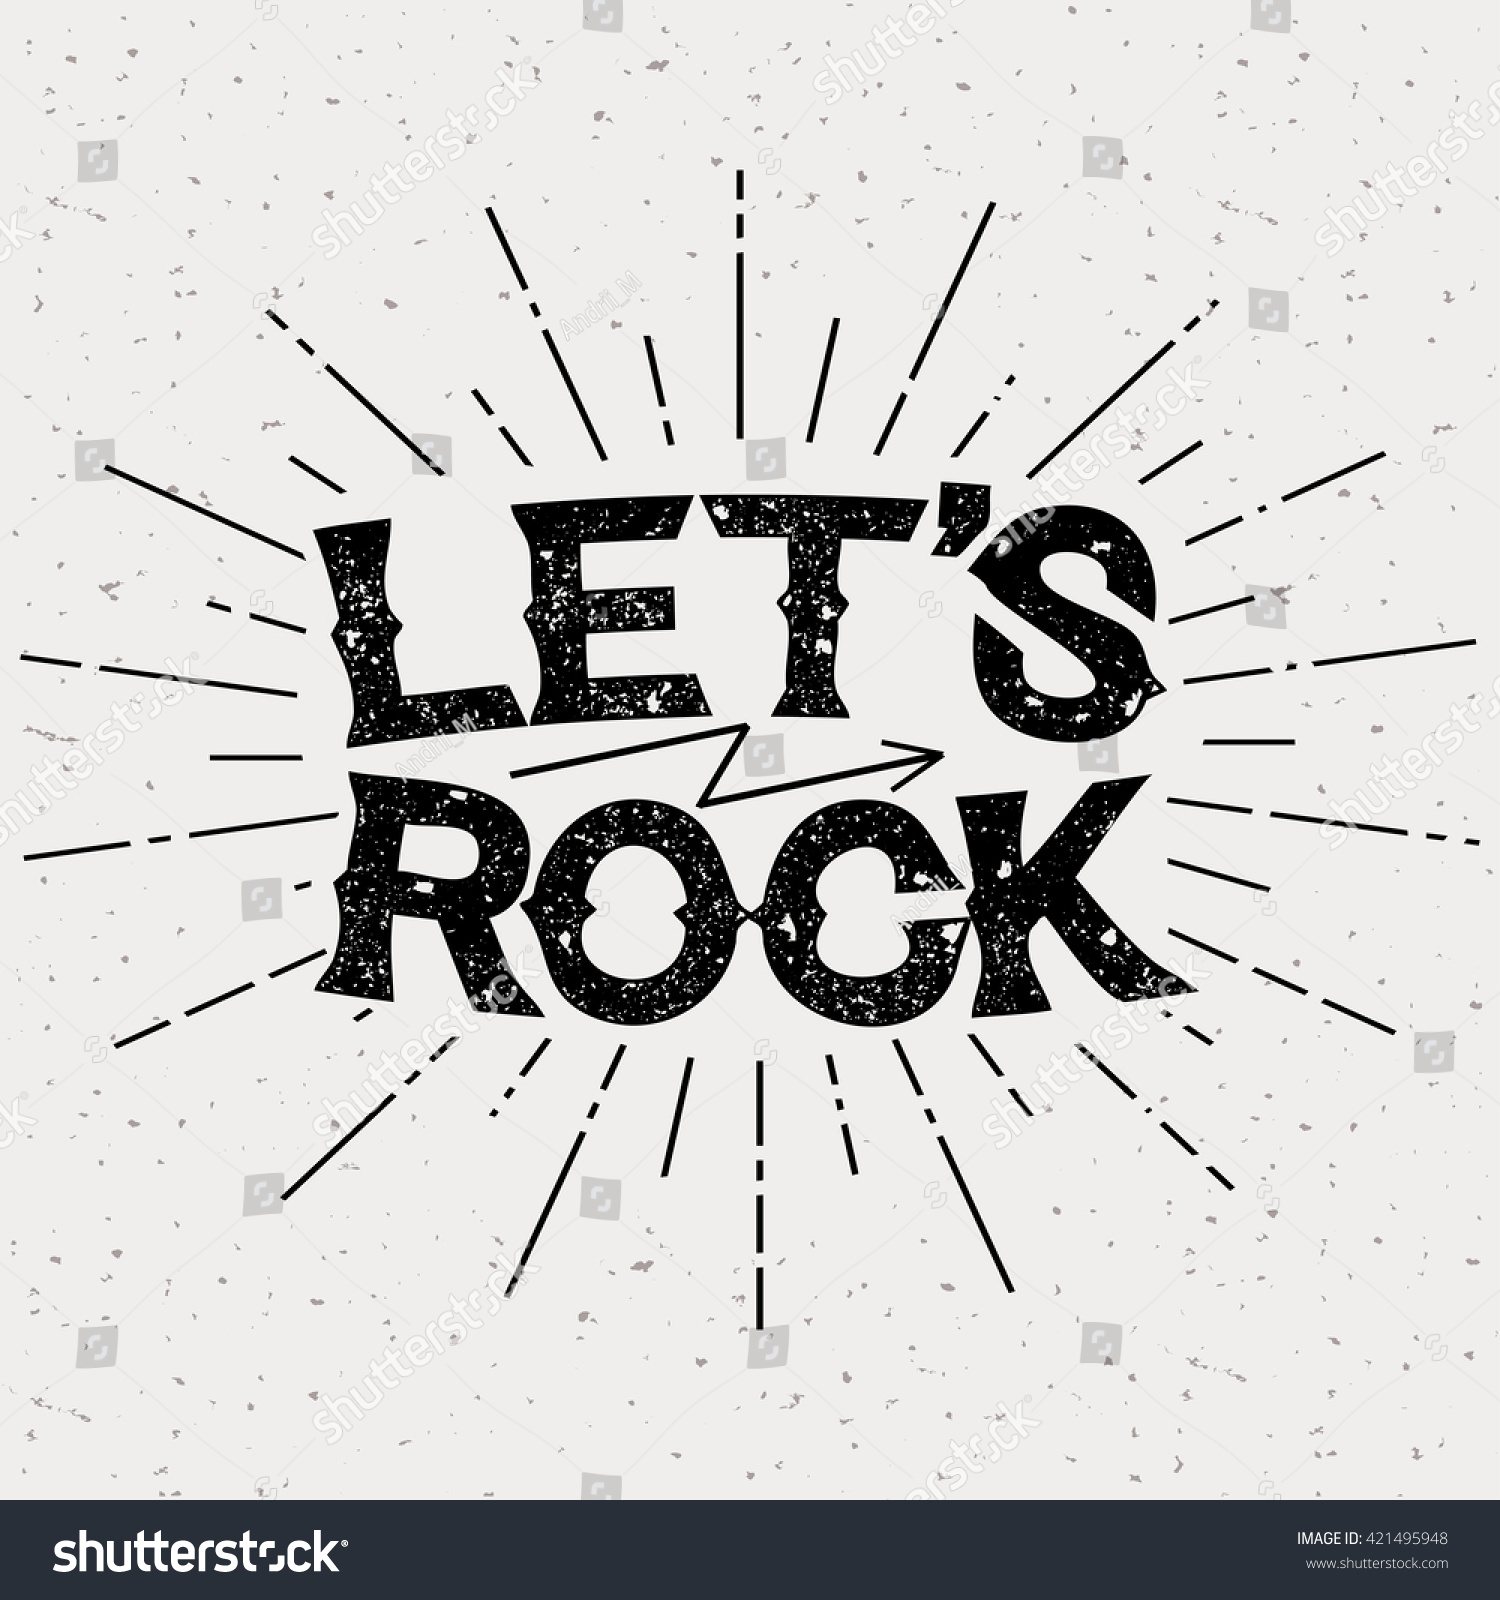 4,496 Rock and roll artwork Images, Stock Photos & Vectors | Shutterstock